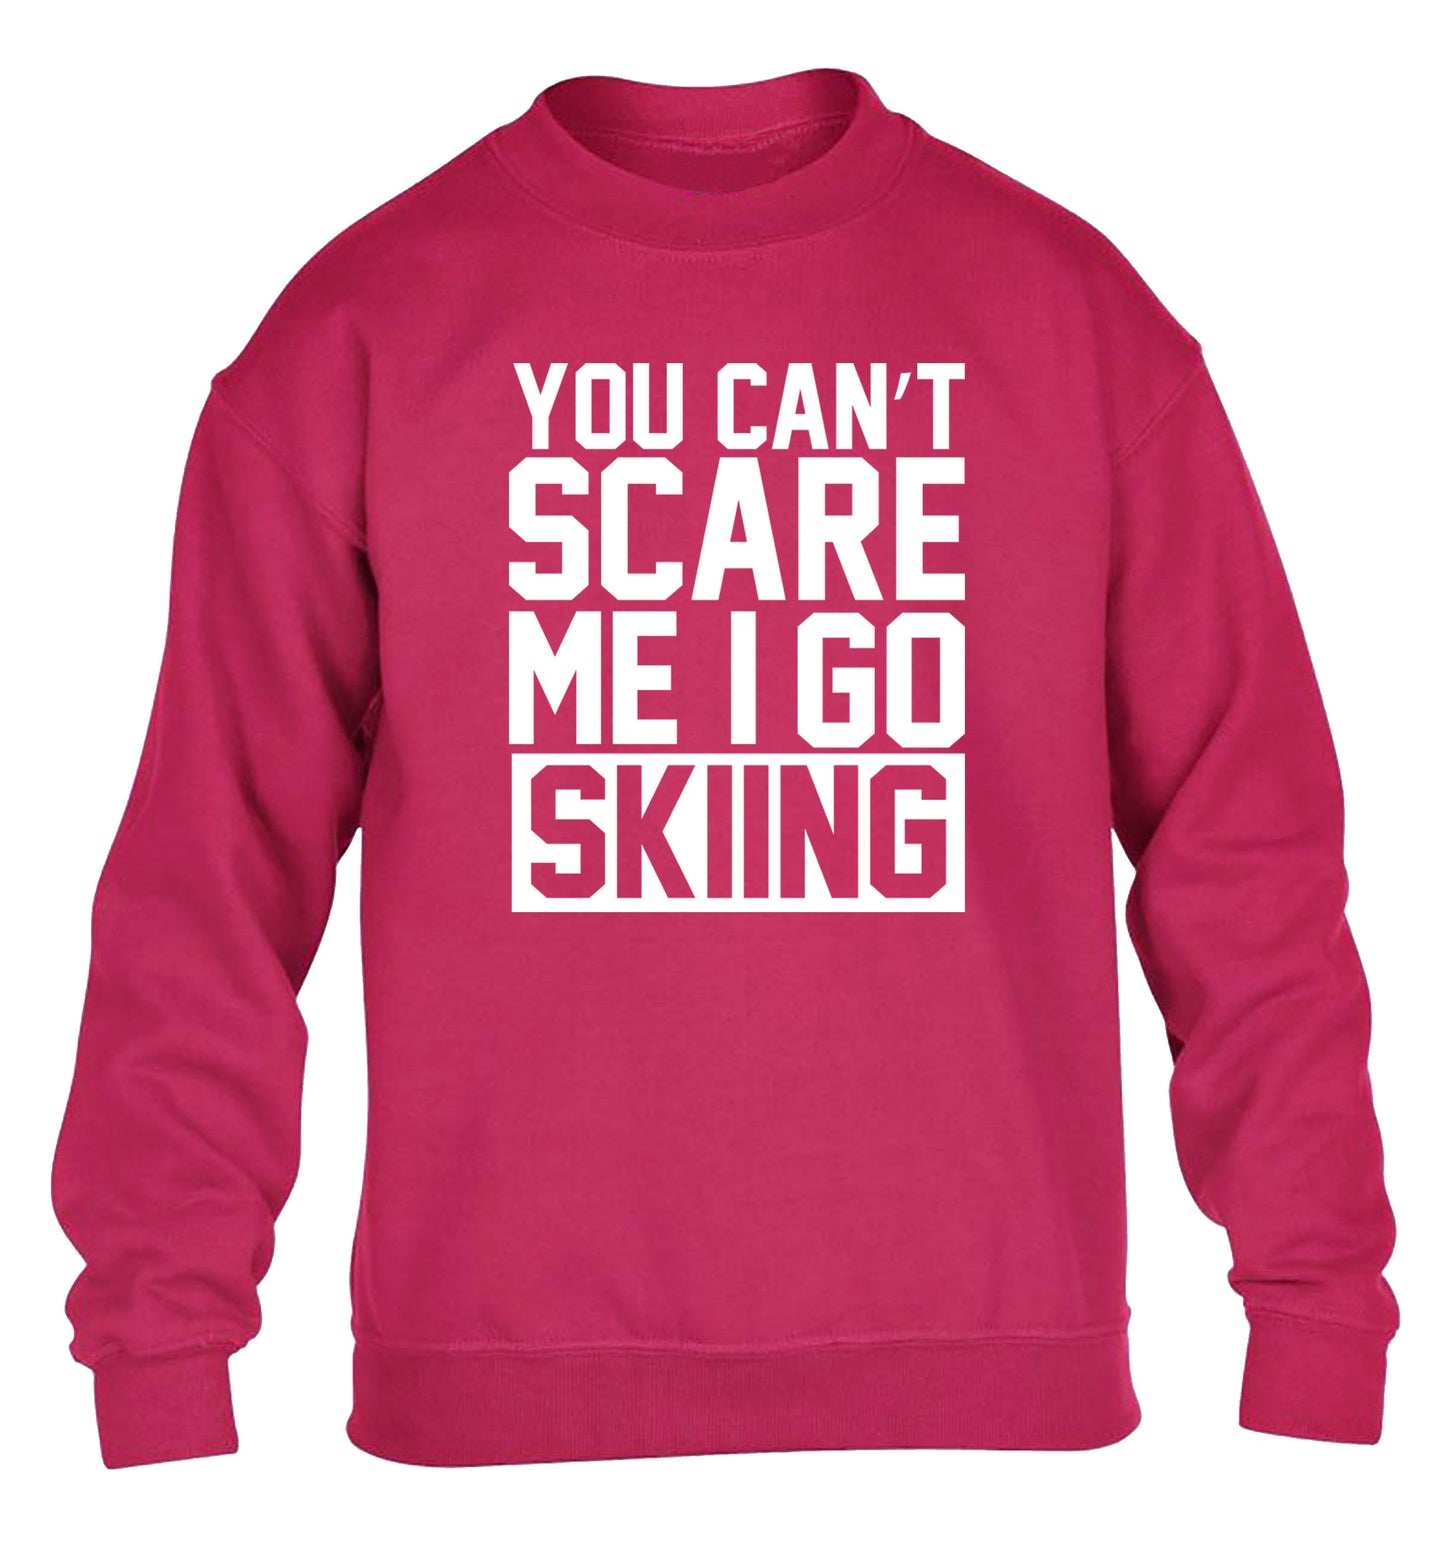 You can't scare me I go skiing children's pink sweater 12-14 Years